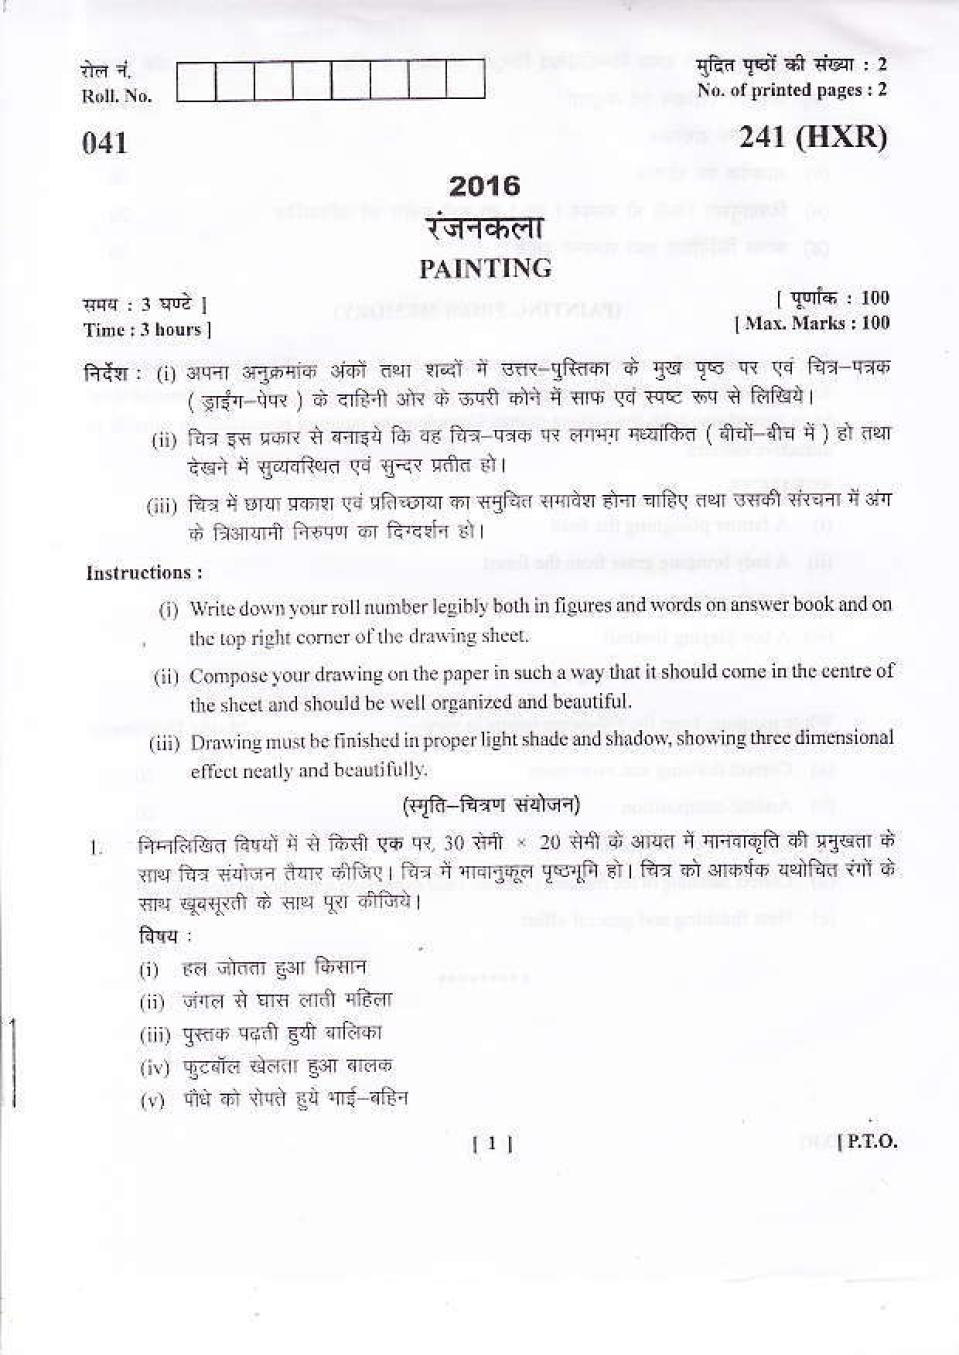 Uttarakhand Board Class 10 Question Paper 2016 for Painting - Page 1